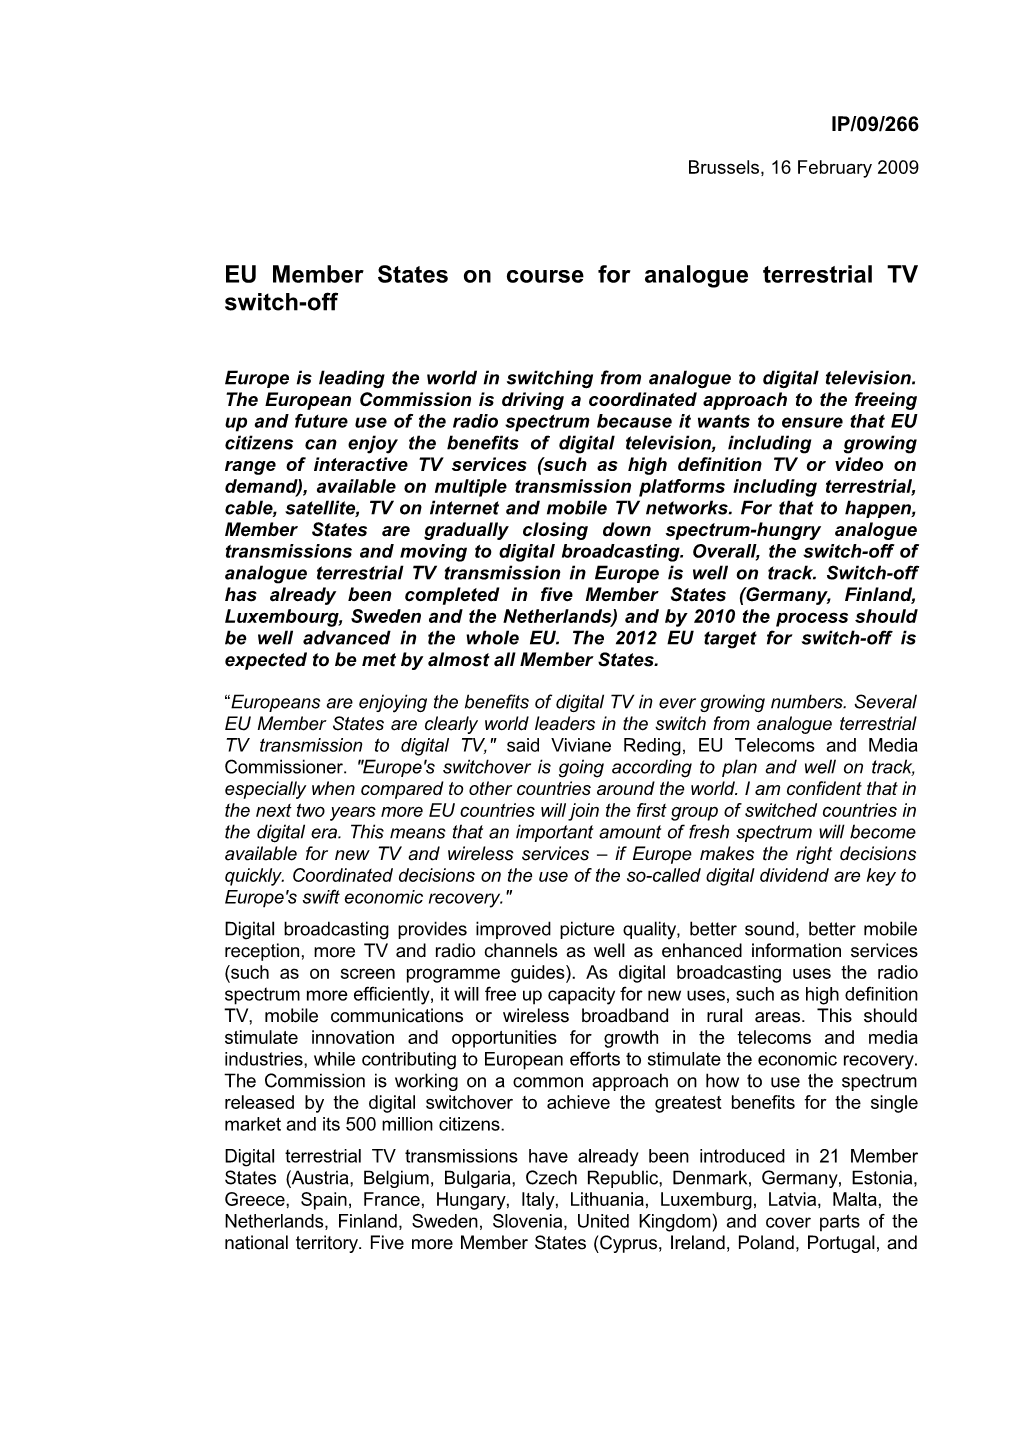 EU Member States on Course for Analogue Terrestrial Tvswitch-Off